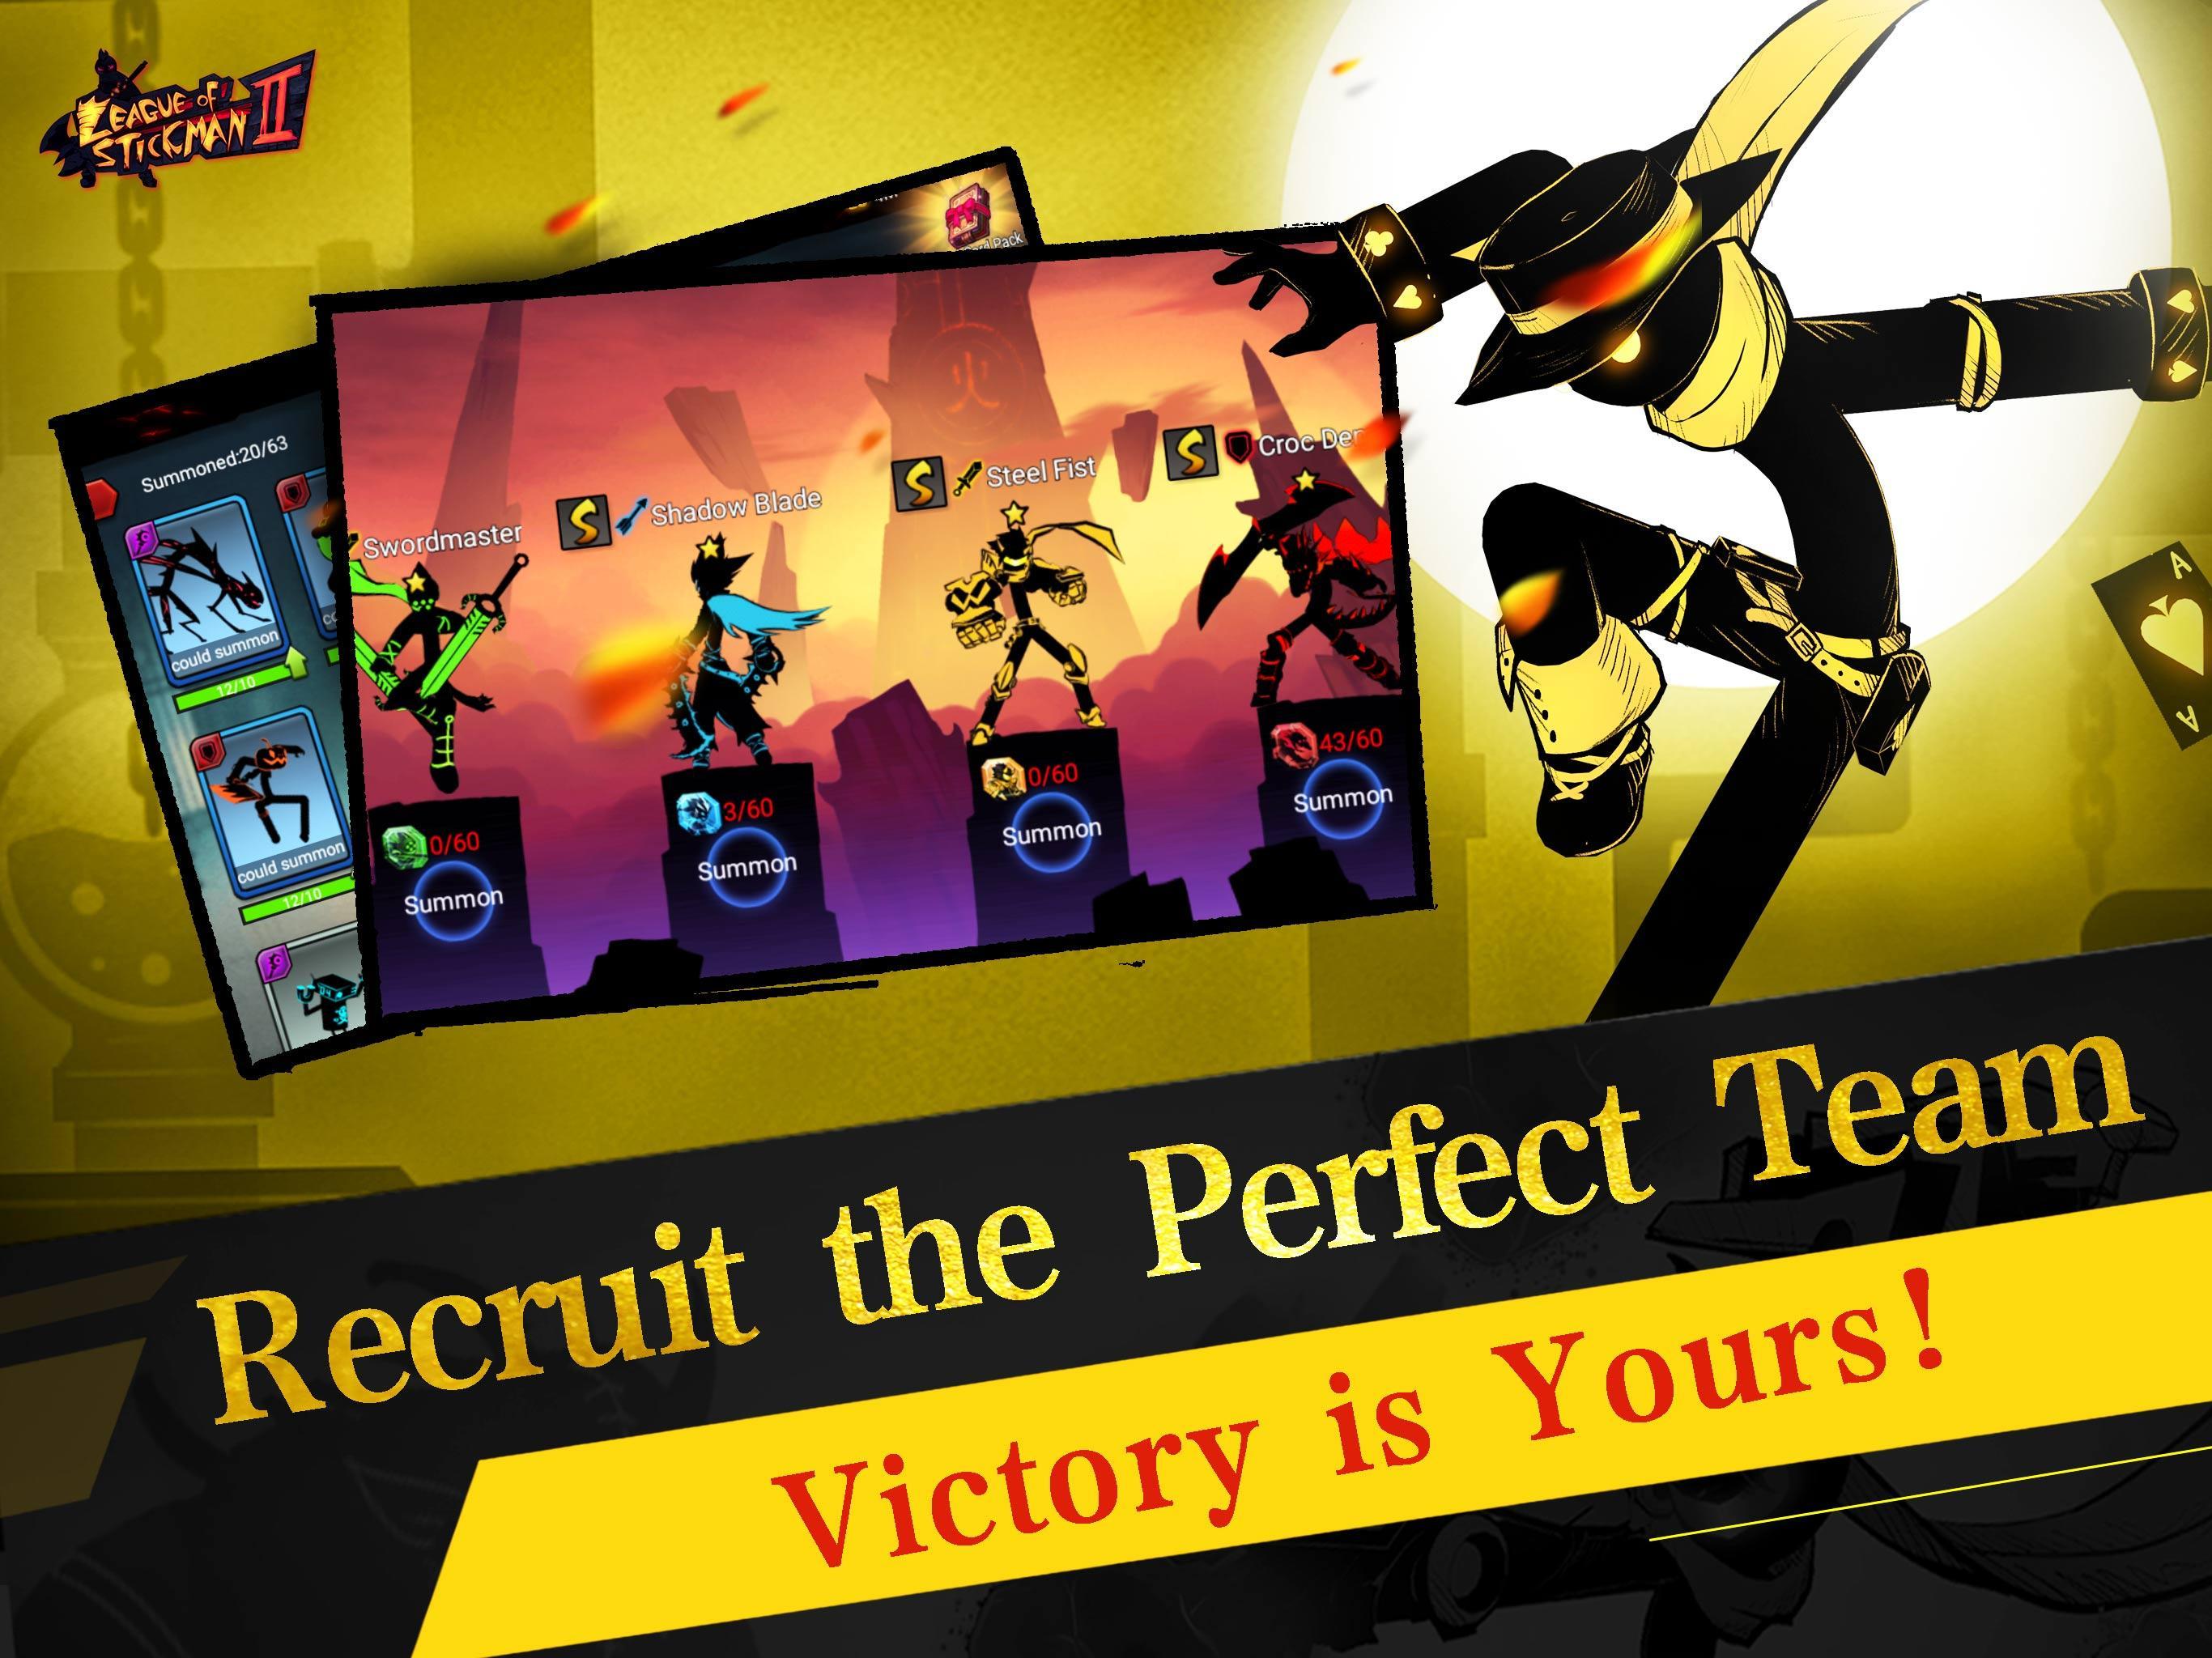 League of Stickman2：the legend on the App Store